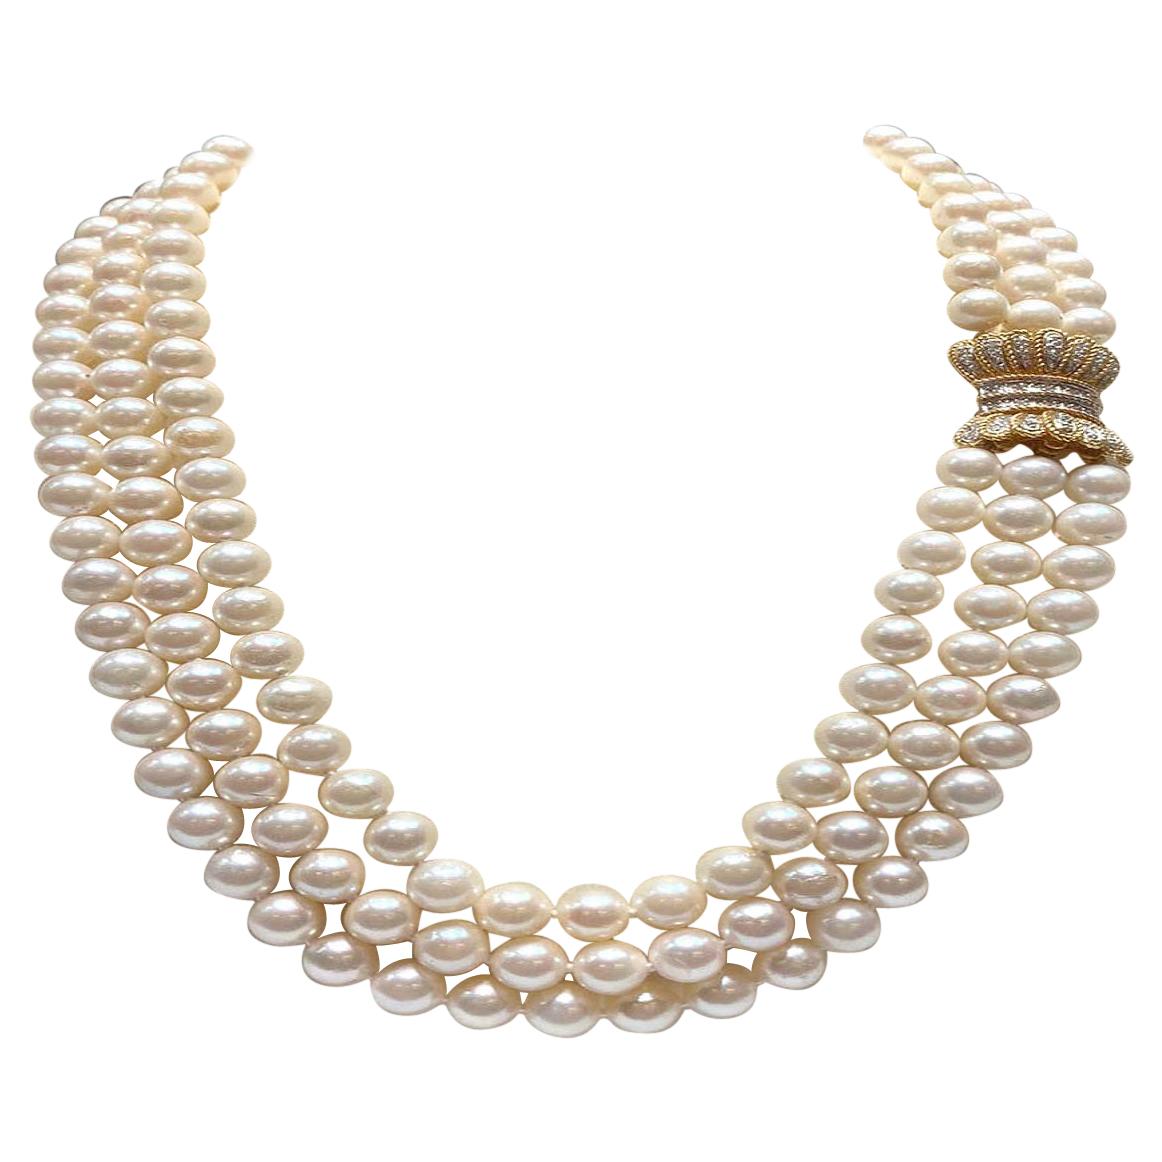 Akoya Japanese Pearls with a 14k Gold Clasp with Diamonds